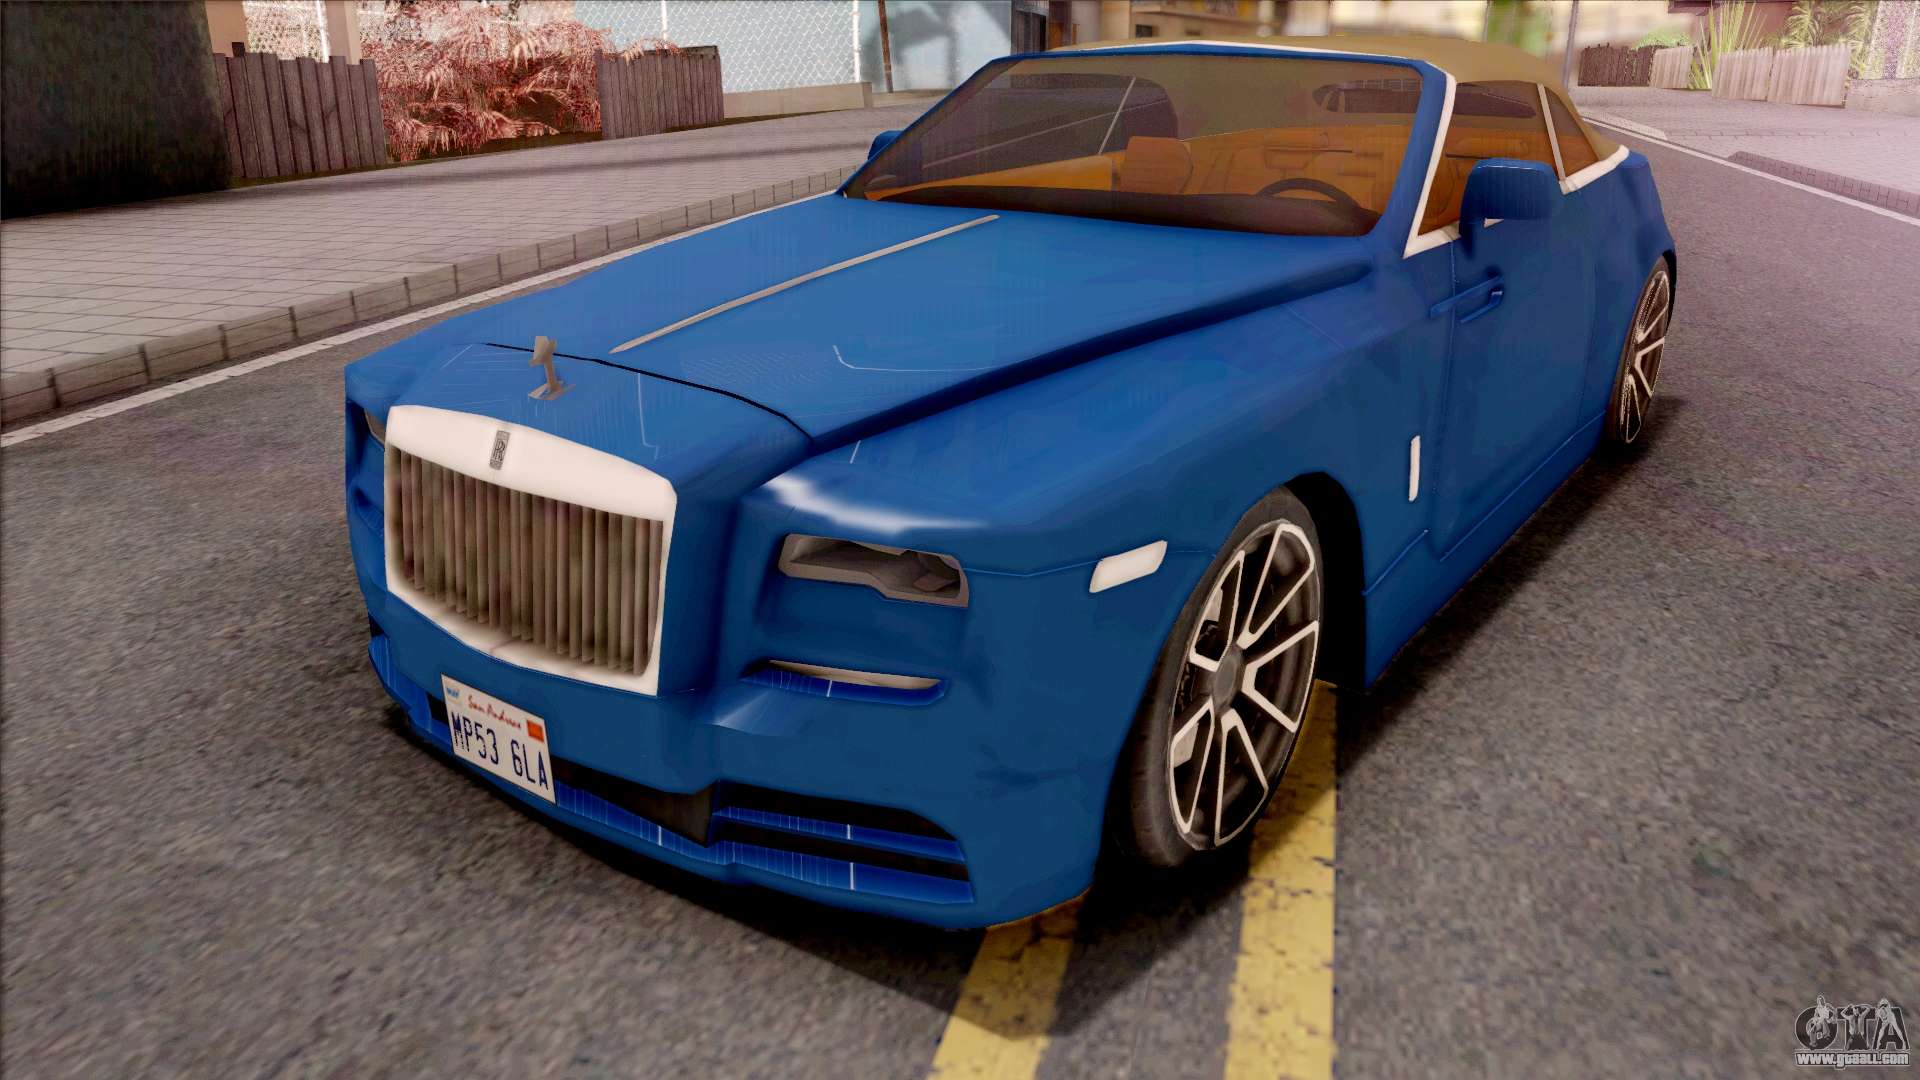 Download Models of cars  Rolls Royce  GTA SA  Grand Theft Auto San  Andreas  on Gtacz